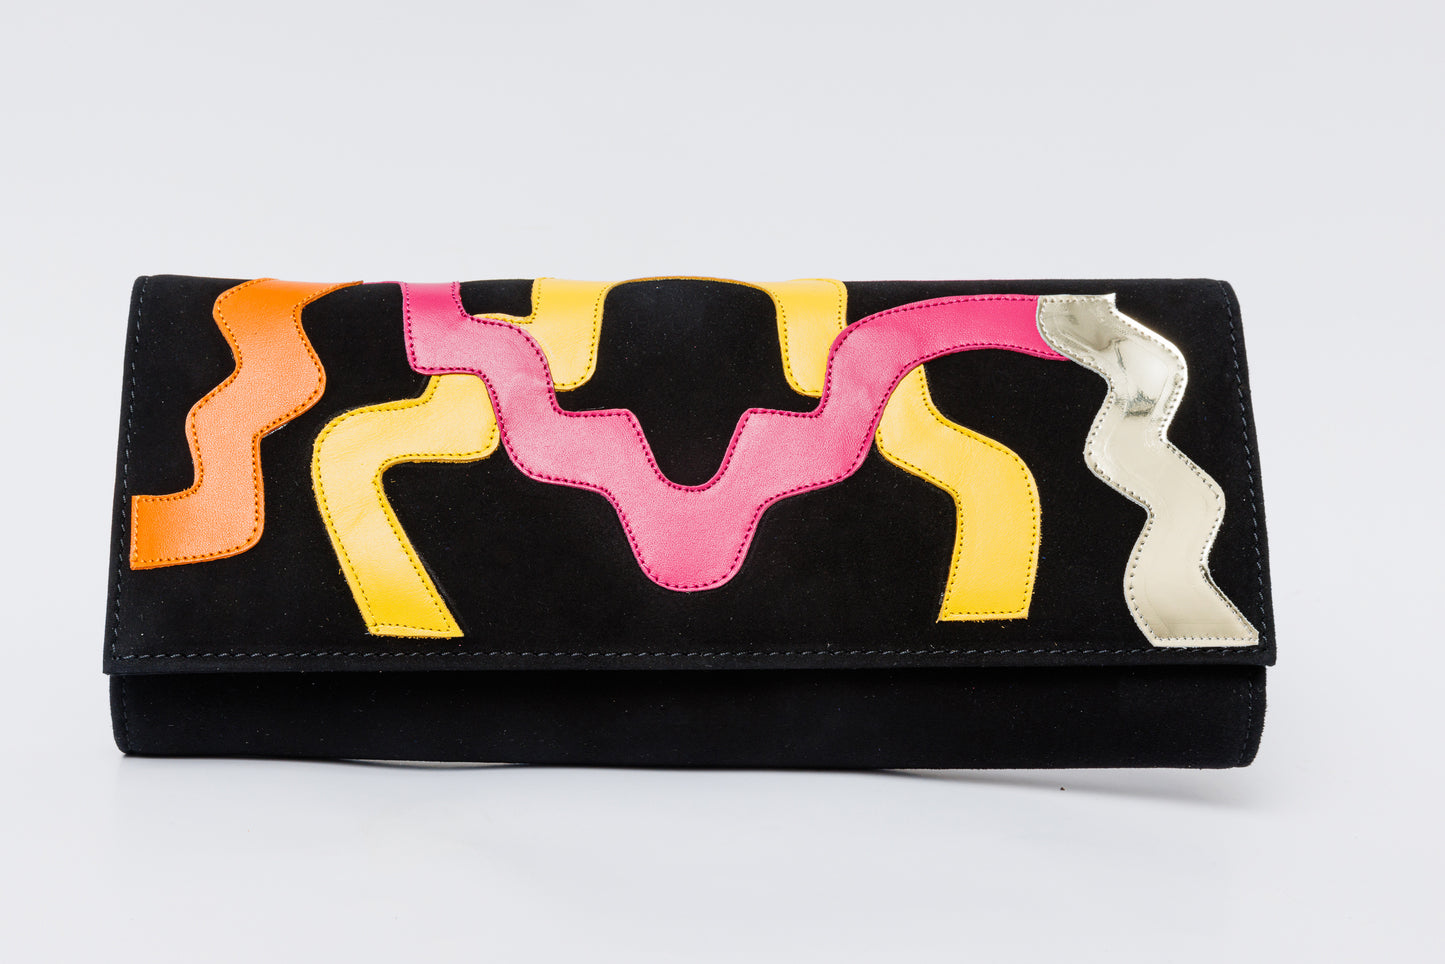 The Tario Black Suede Leather Clutch